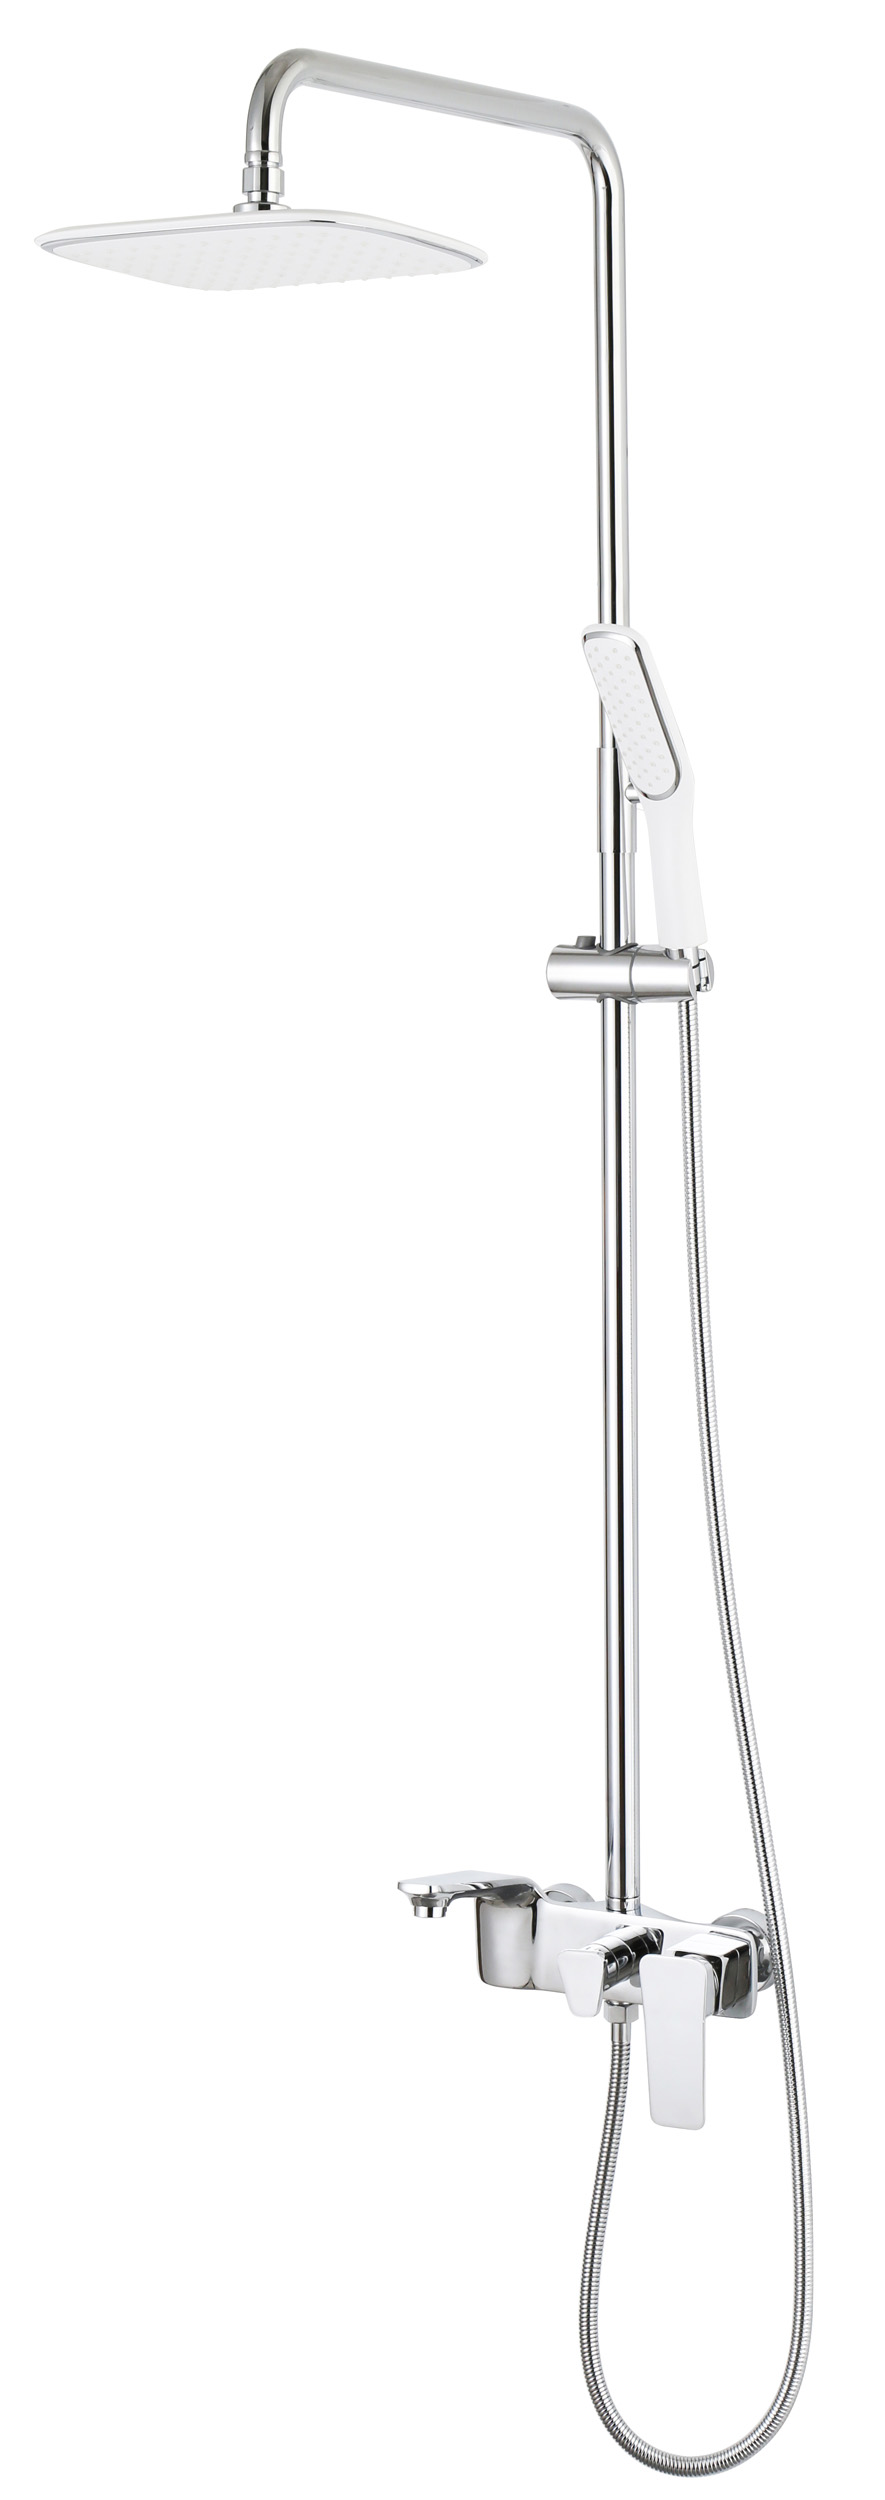 European-style Hot And Cold Shower Faucets